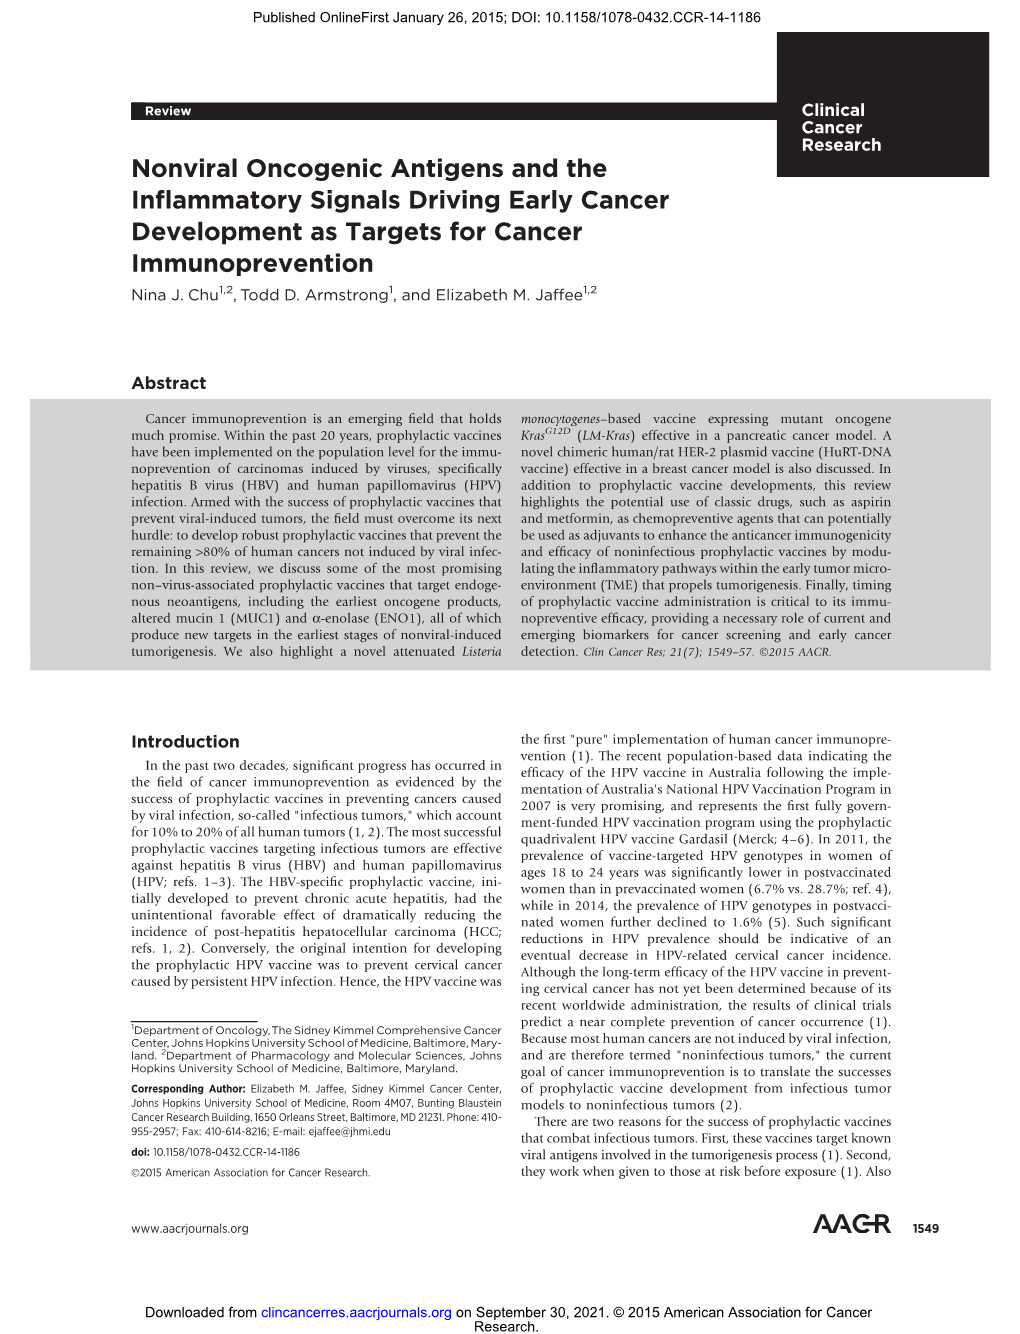 Nonviral Oncogenic Antigens and the Inﬂammatory Signals Driving Early Cancer Development As Targets for Cancer Immunoprevention Nina J